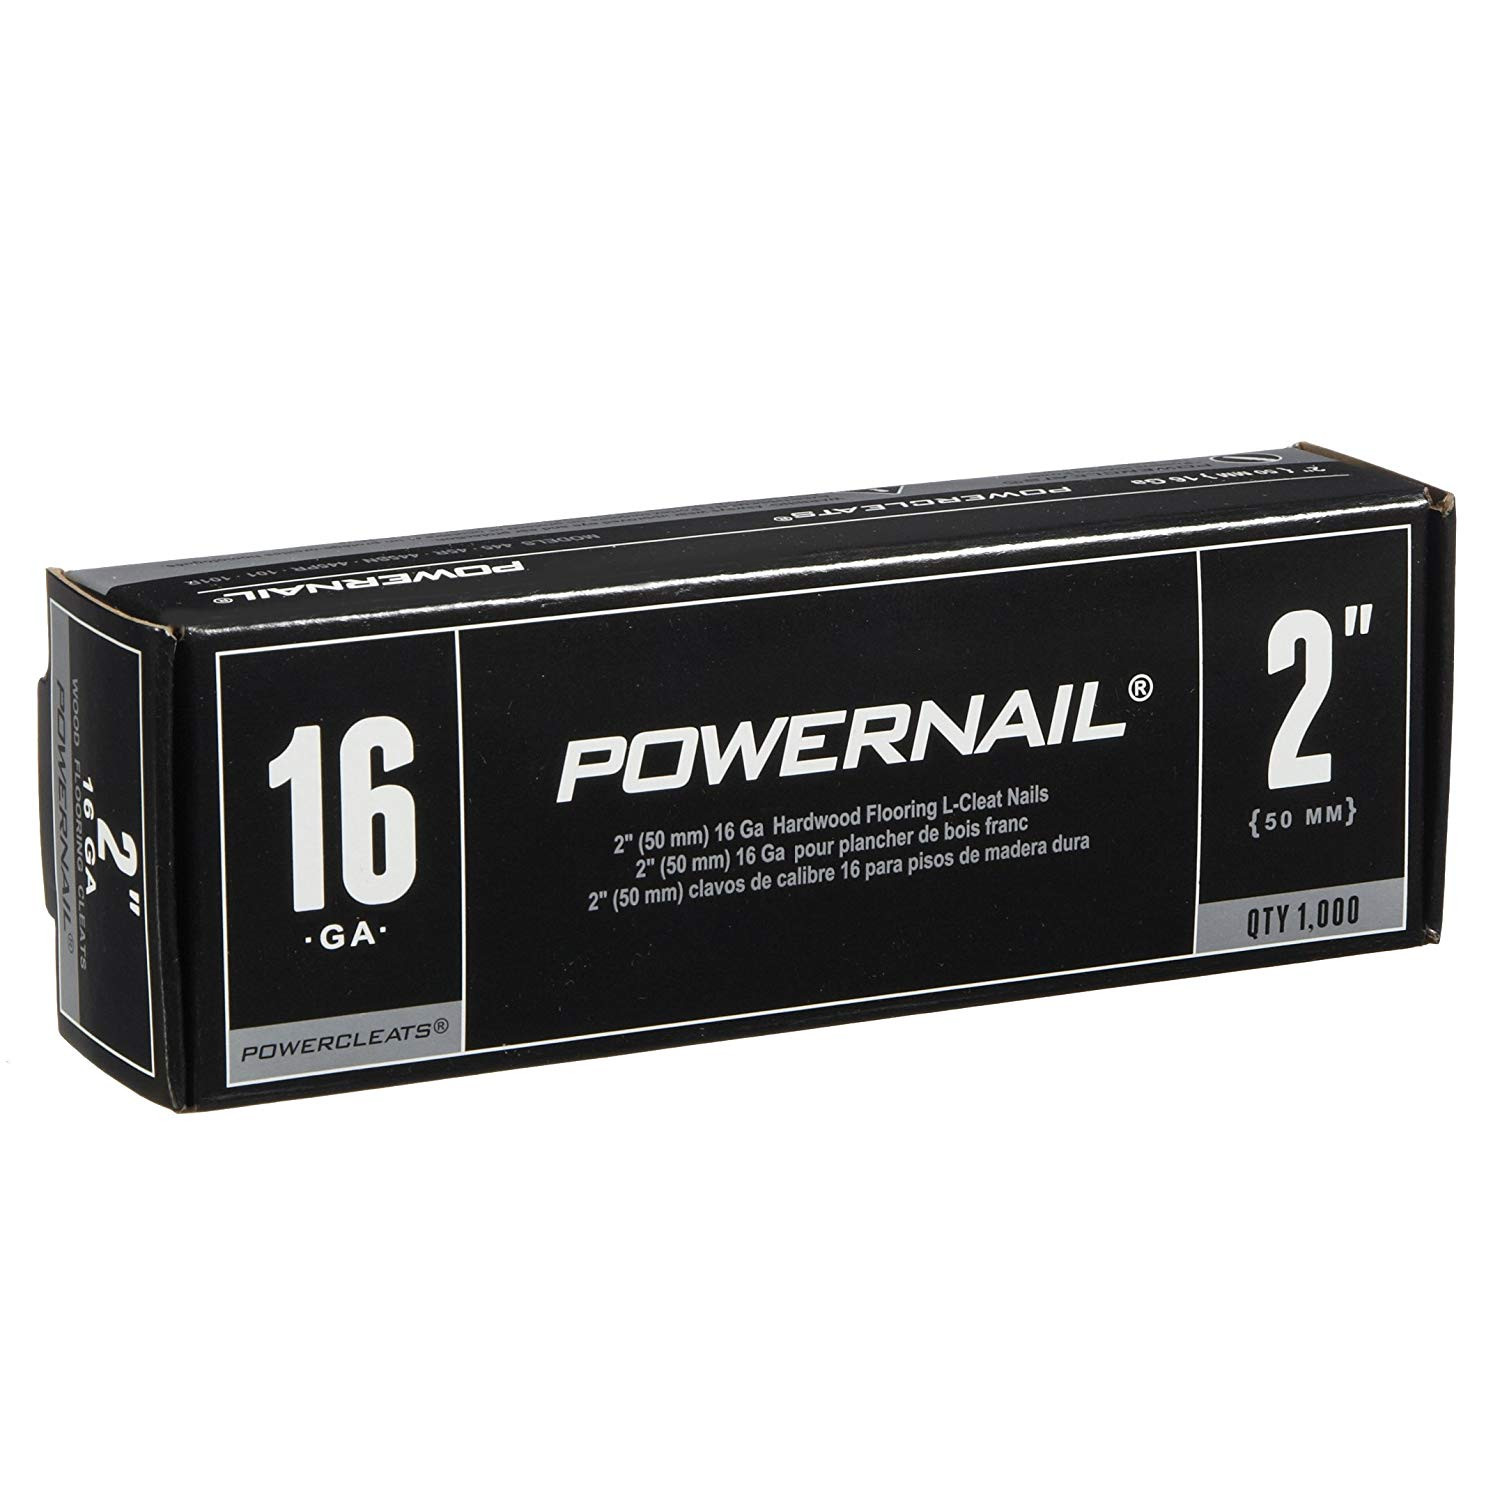 24 Awesome 1 2 Inch Vs 3 4 Inch Hardwood Flooring 2024 free download 1 2 inch vs 3 4 inch hardwood flooring of amazon com powernail powercleat 16ga 2 l cleat box of 5000 home inside amazon com powernail powercleat 16ga 2 l cleat box of 5000 home improvement